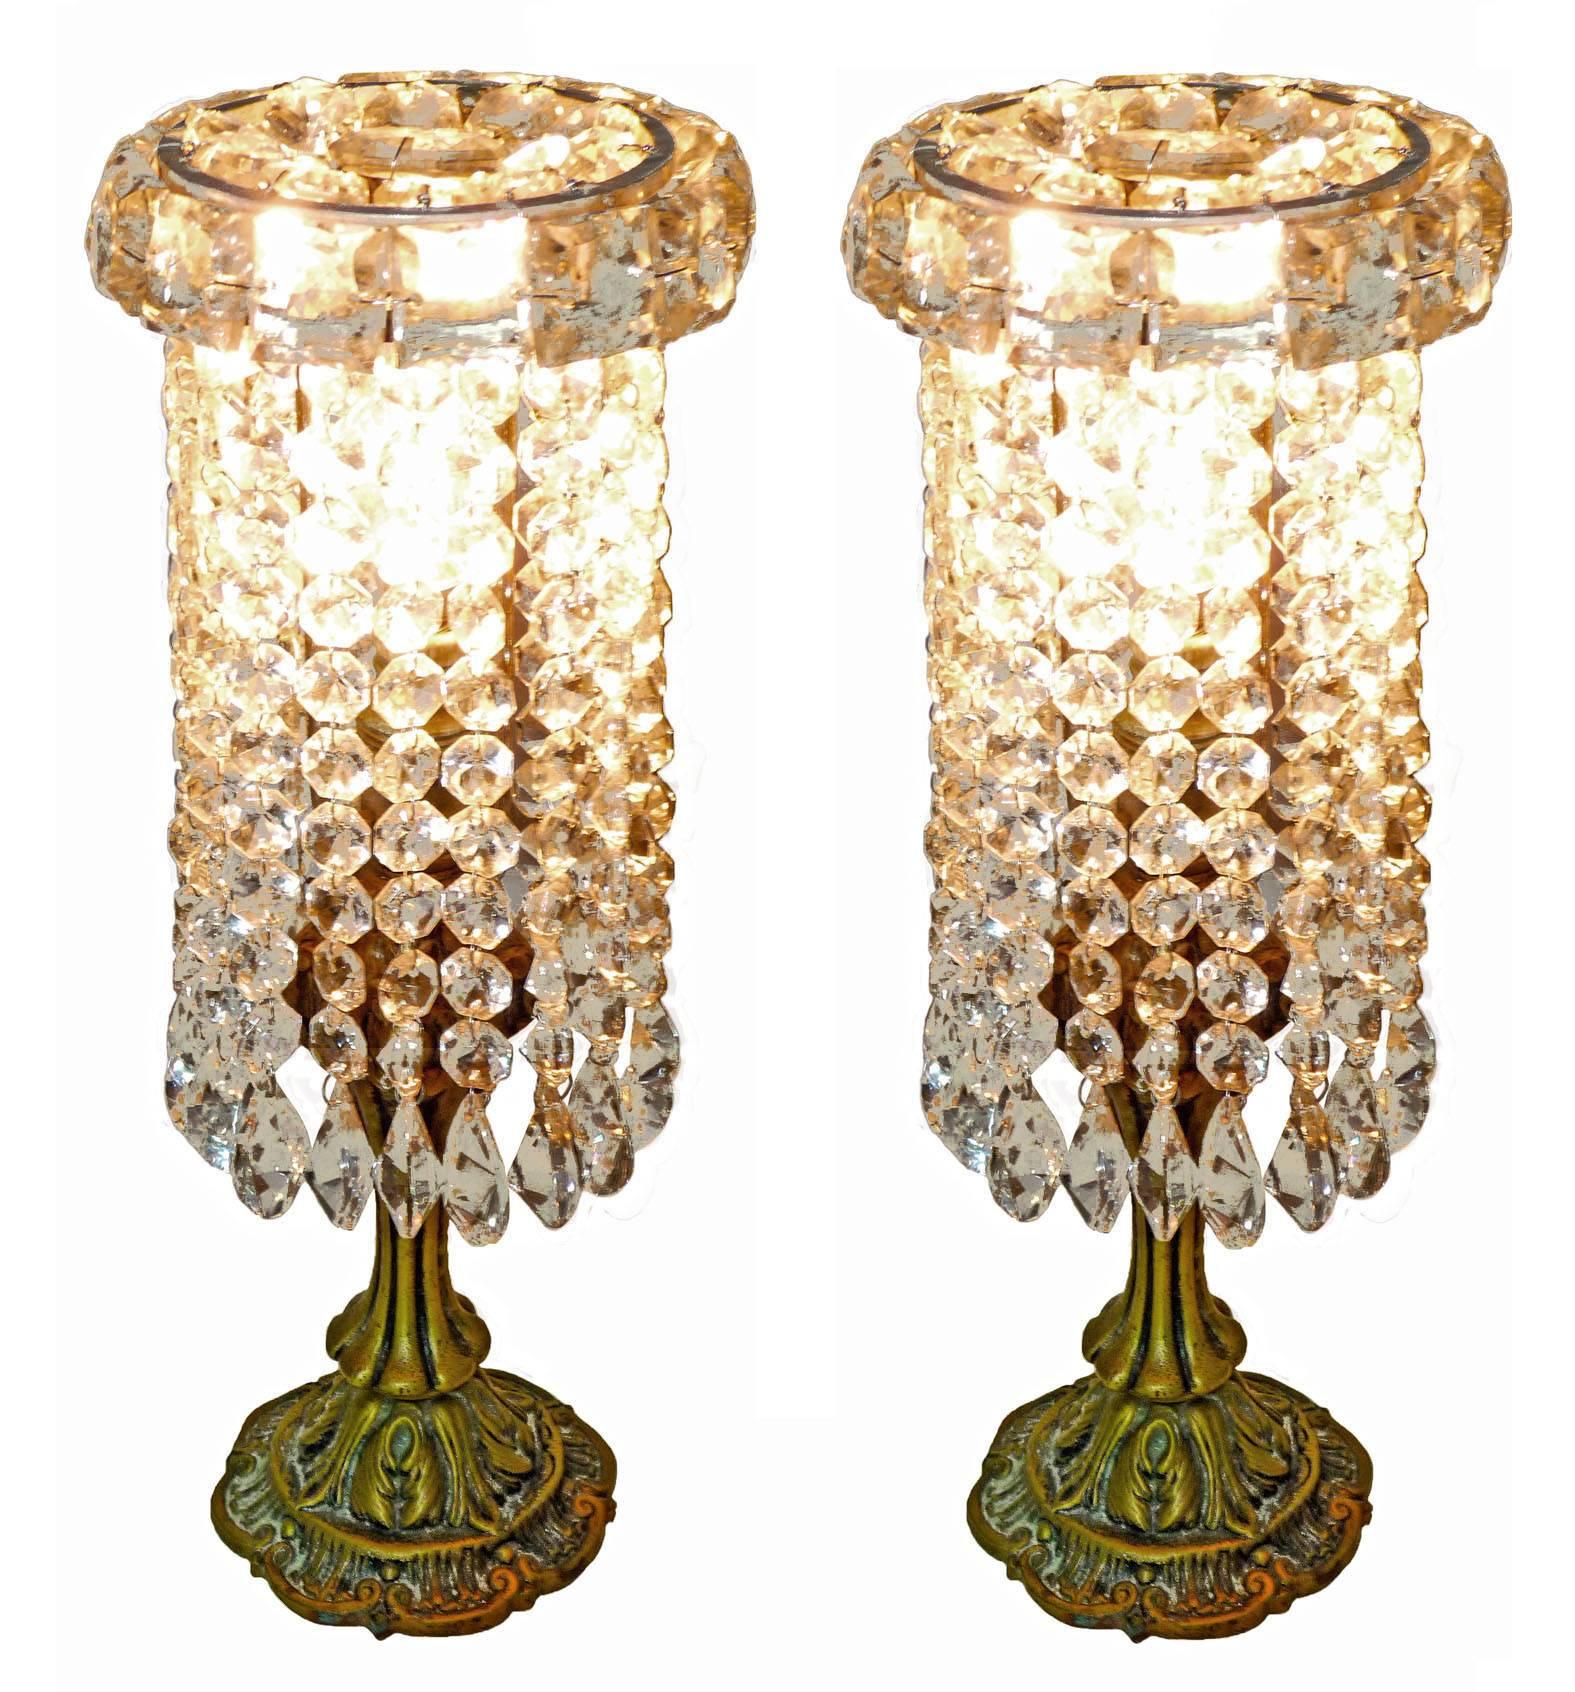 Pair of French Regency Empire in bronze and crystal table lamps
Housing one-light bulb each E14. Bronze detailing with all crystal intact.
Measures:
Height 13 in /33 cm
Diameter 6 in /15 cm
Weight: 8 lb. / 4 kg
Two light bulbs ( E14 )
Good